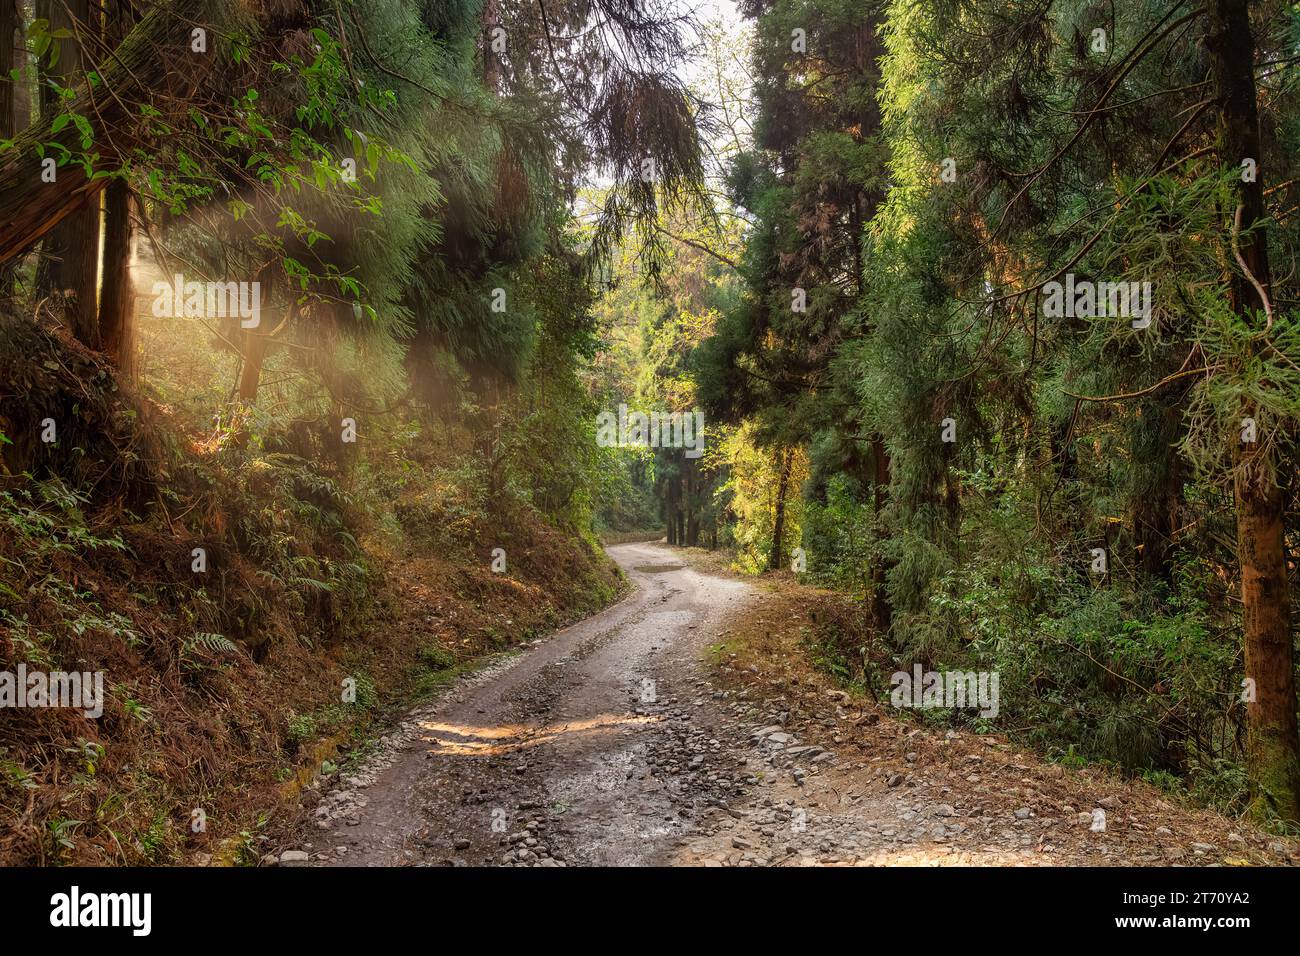 Mountain road passing through dense forest with morning sunlight coming through the trees at Lava, in the district of Kalimpong, India Stock Photo